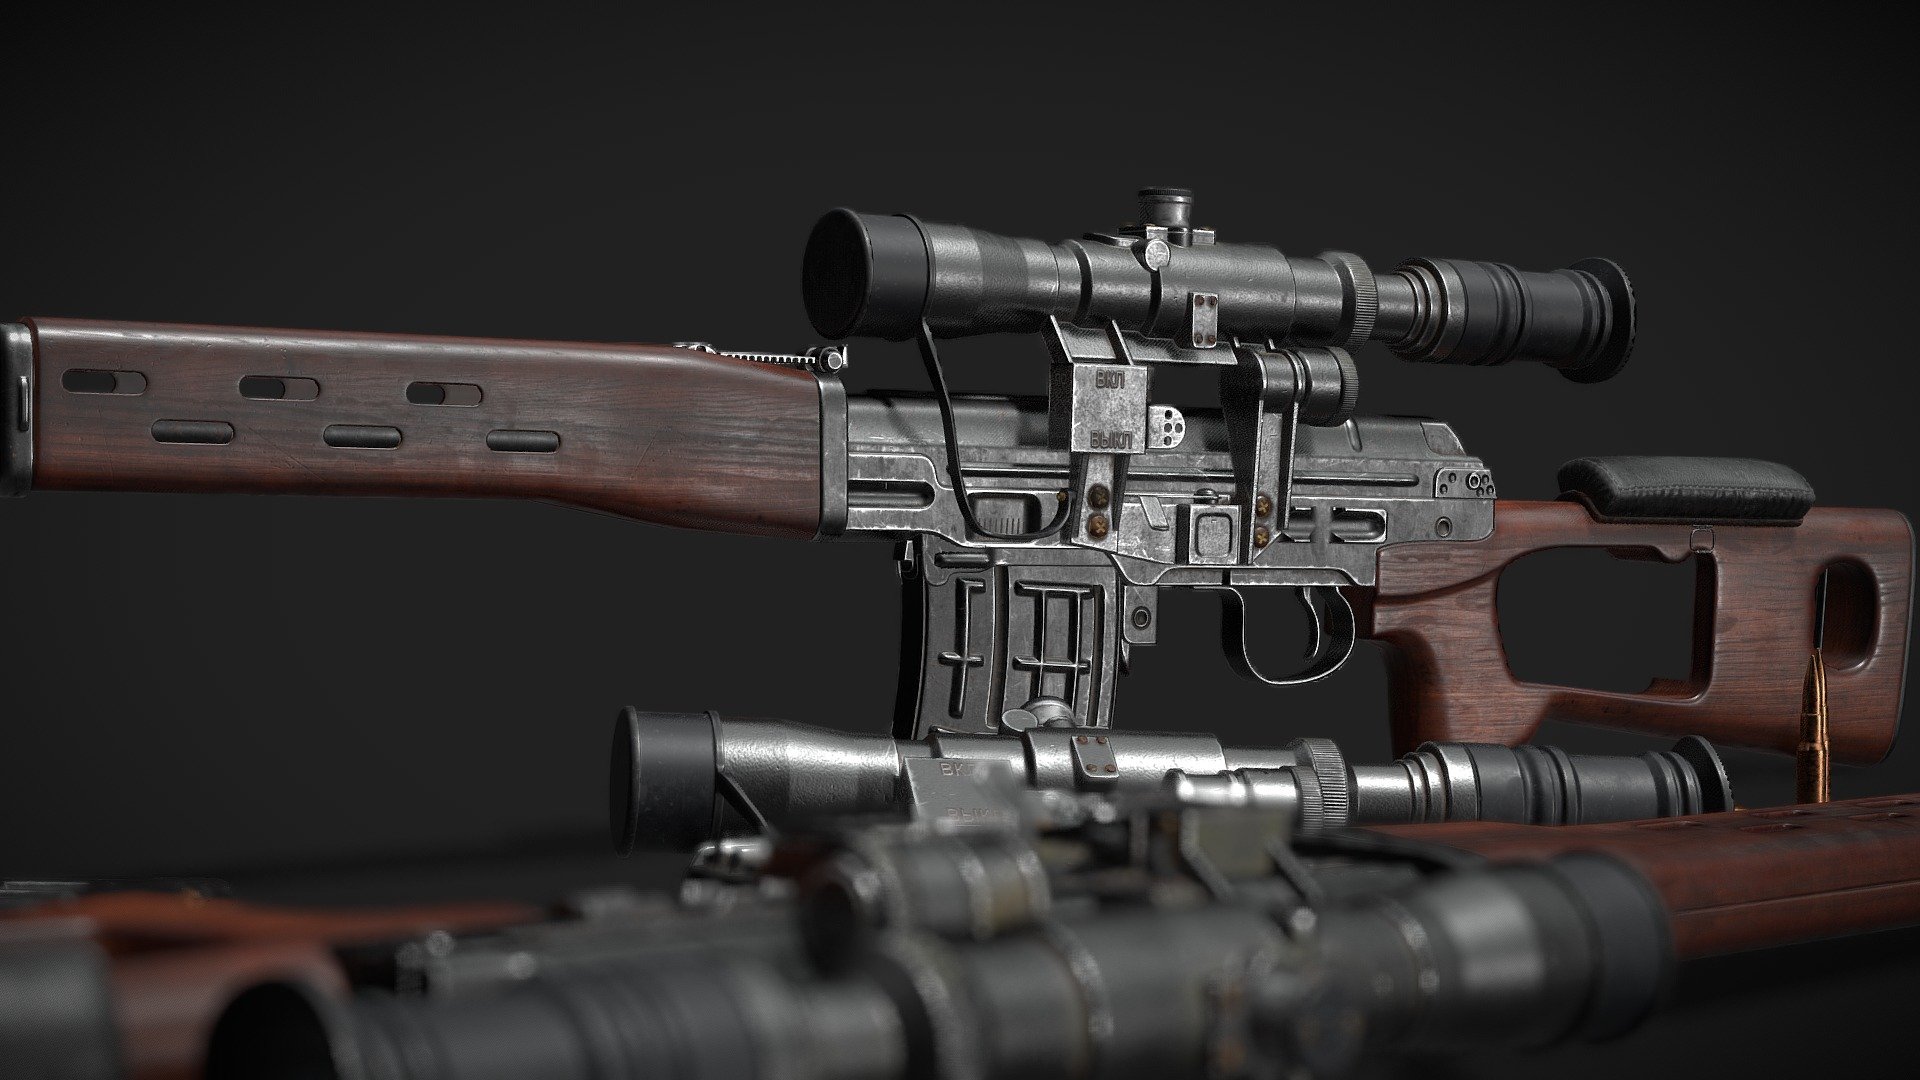 Dragunov made in 3Ds Max and Substance Painter 3d model